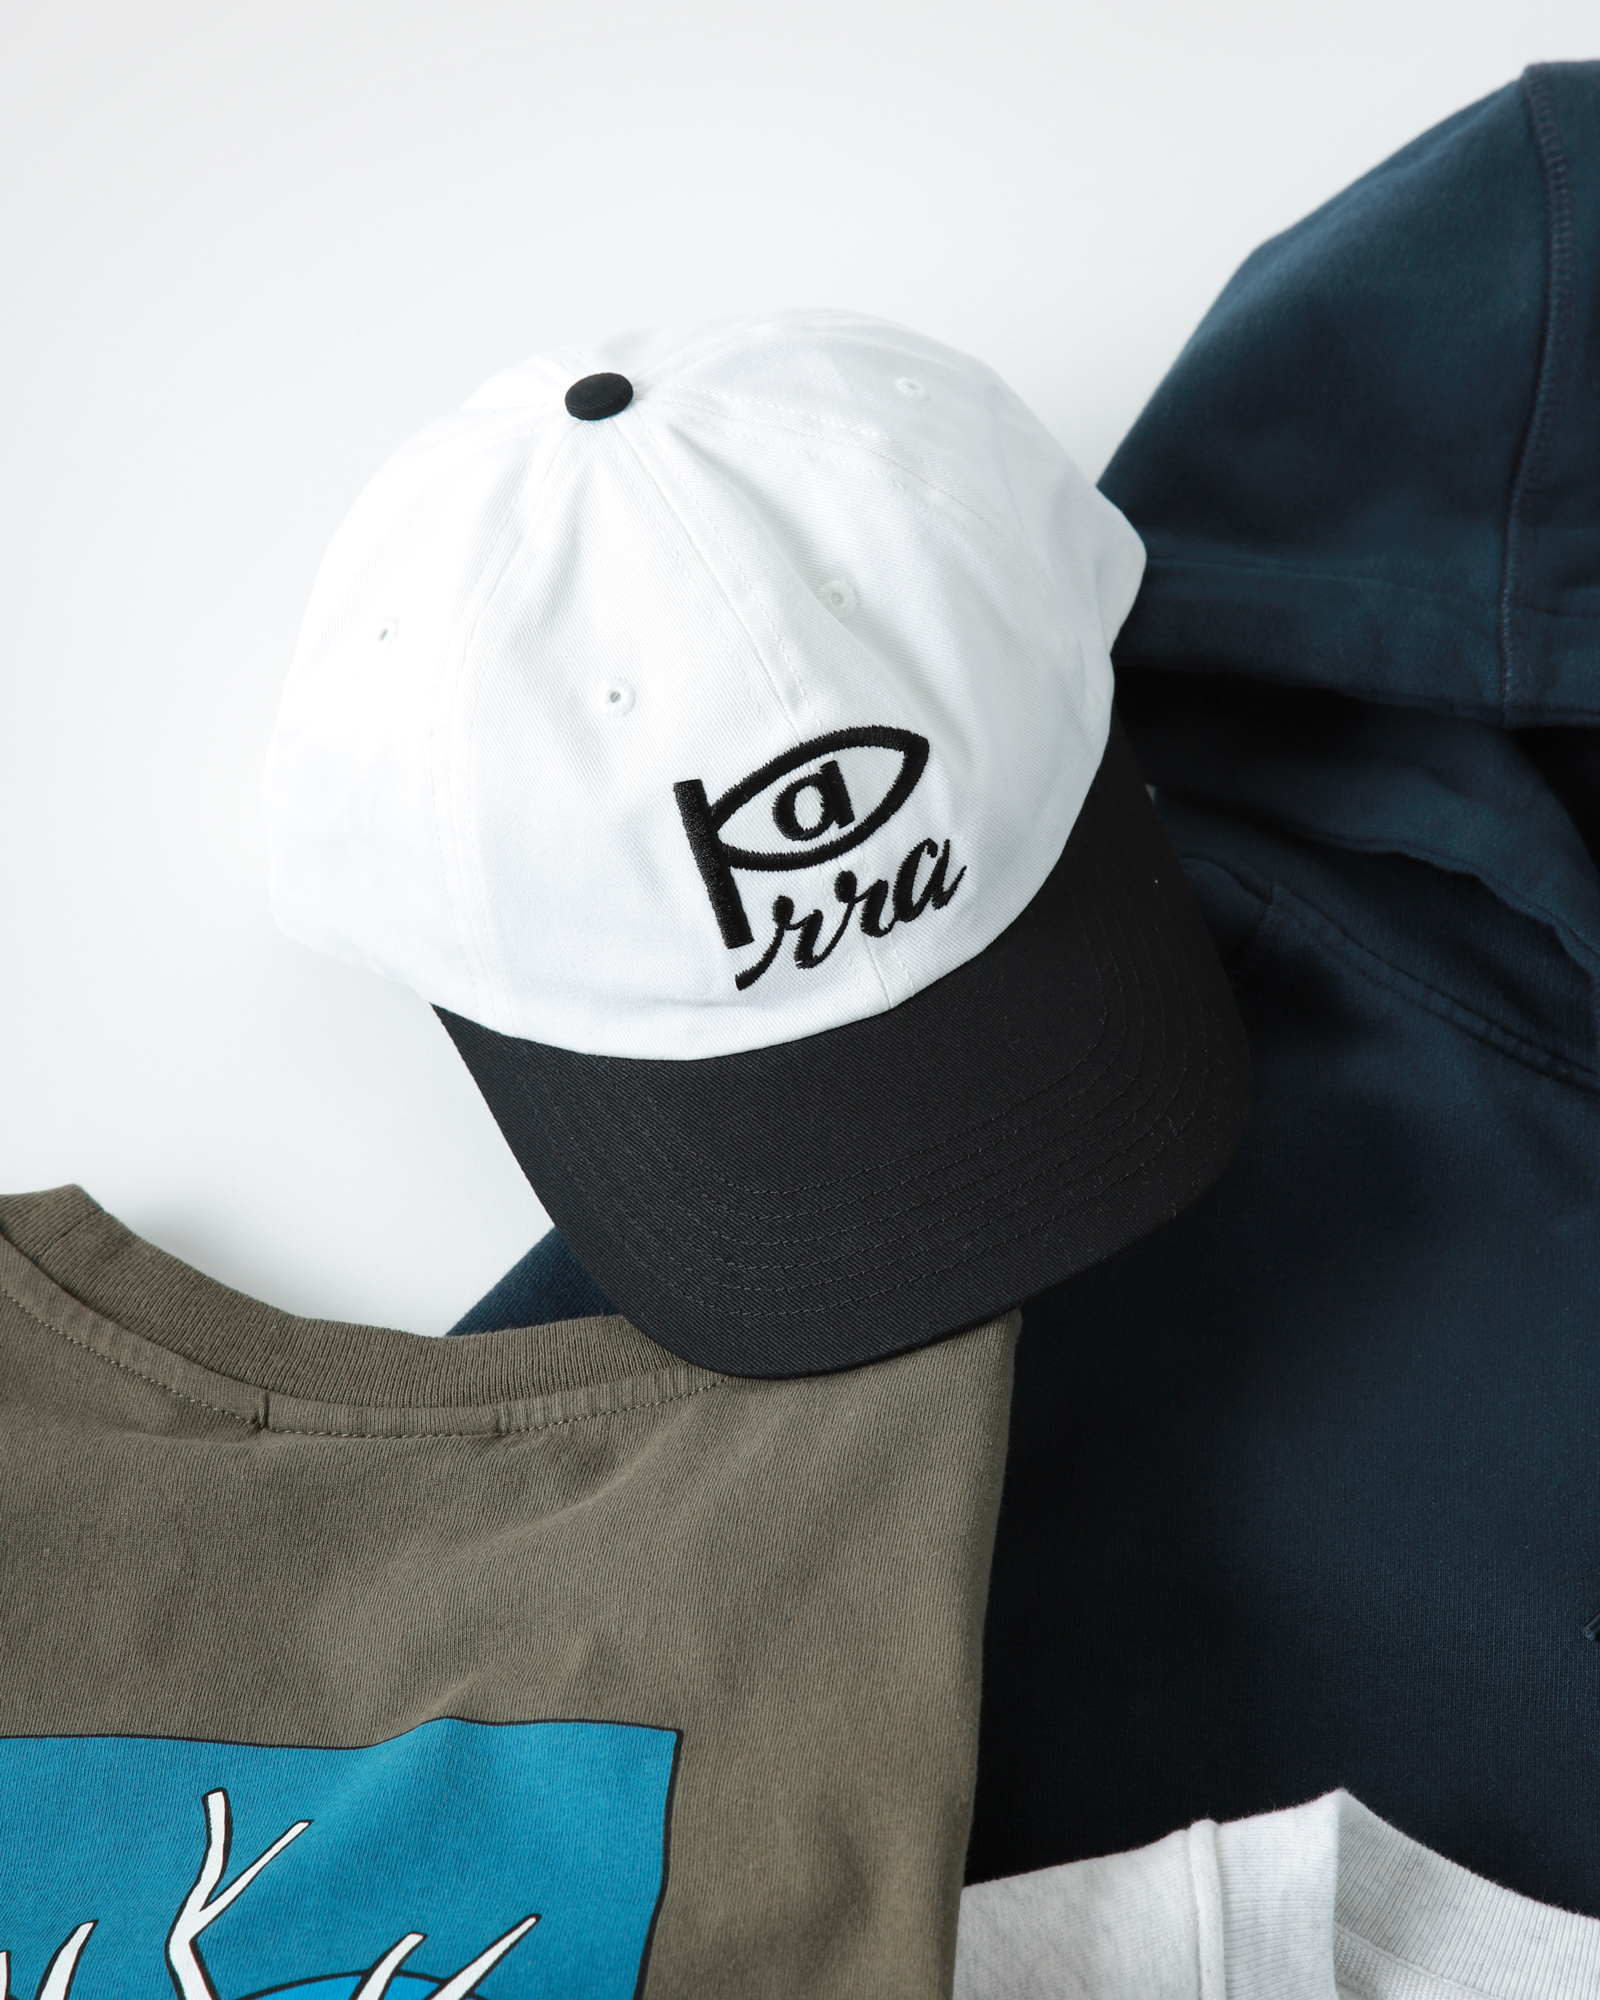 Don’t sleep: By Parra is here